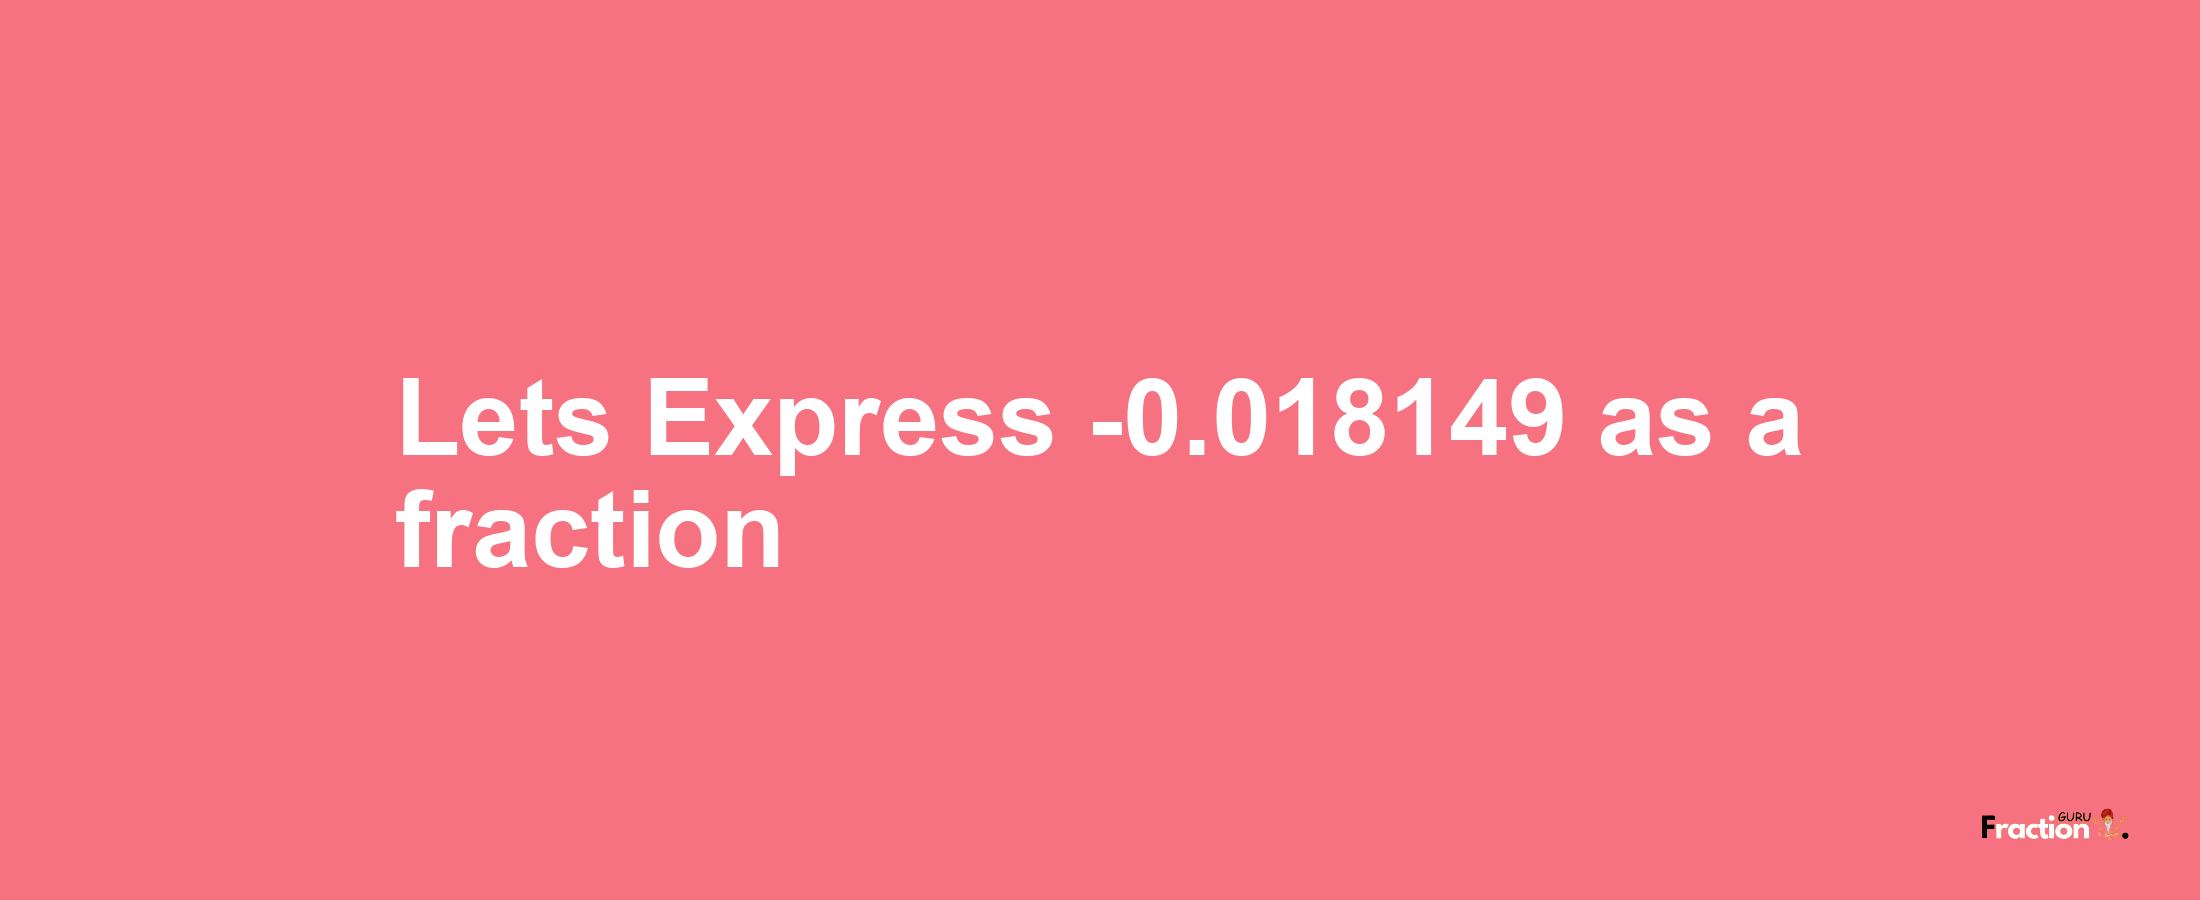 Lets Express -0.018149 as afraction